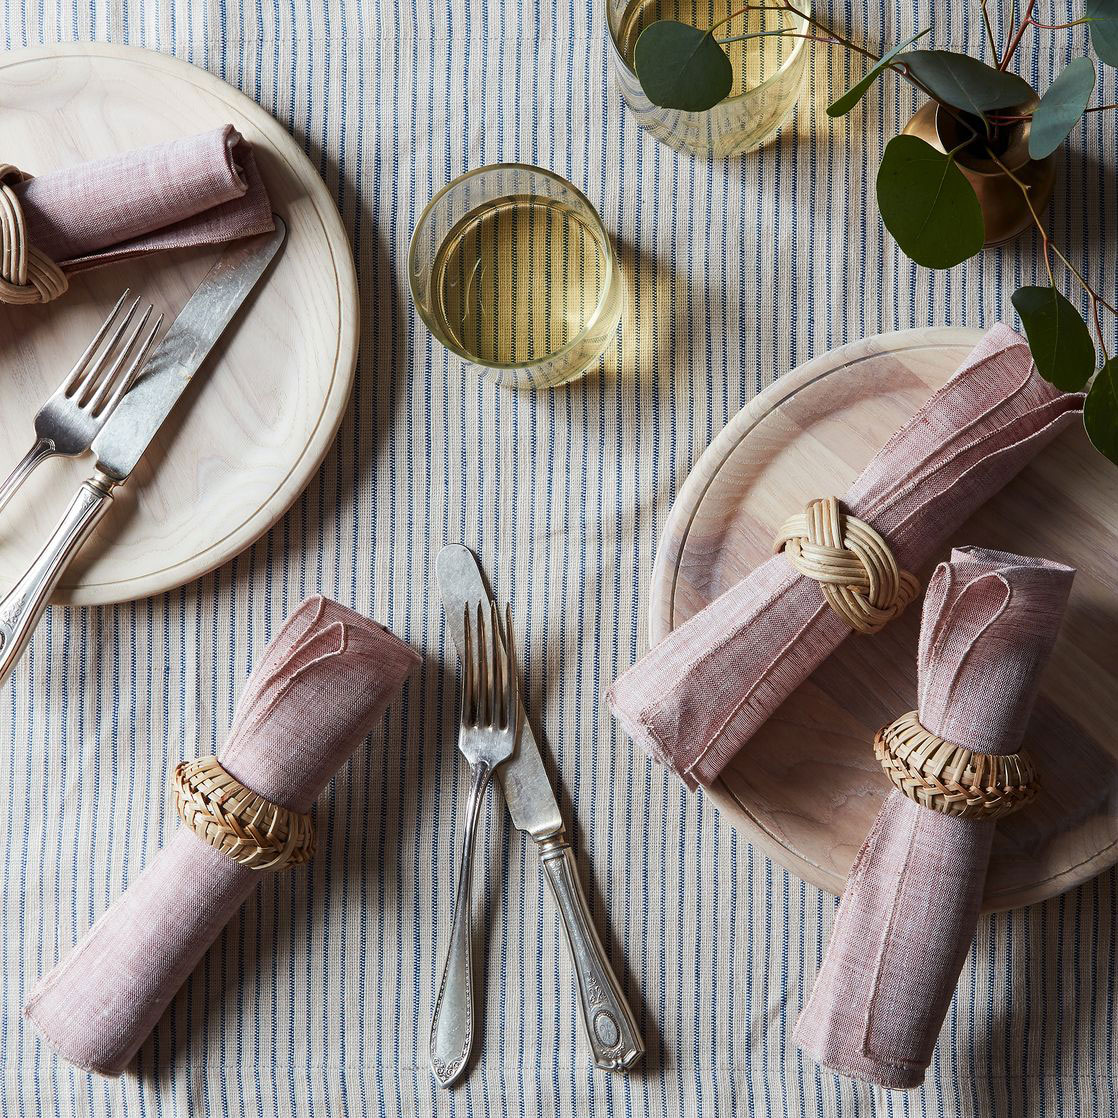 10 Stunning Ways to Set Your Thanksgiving Table